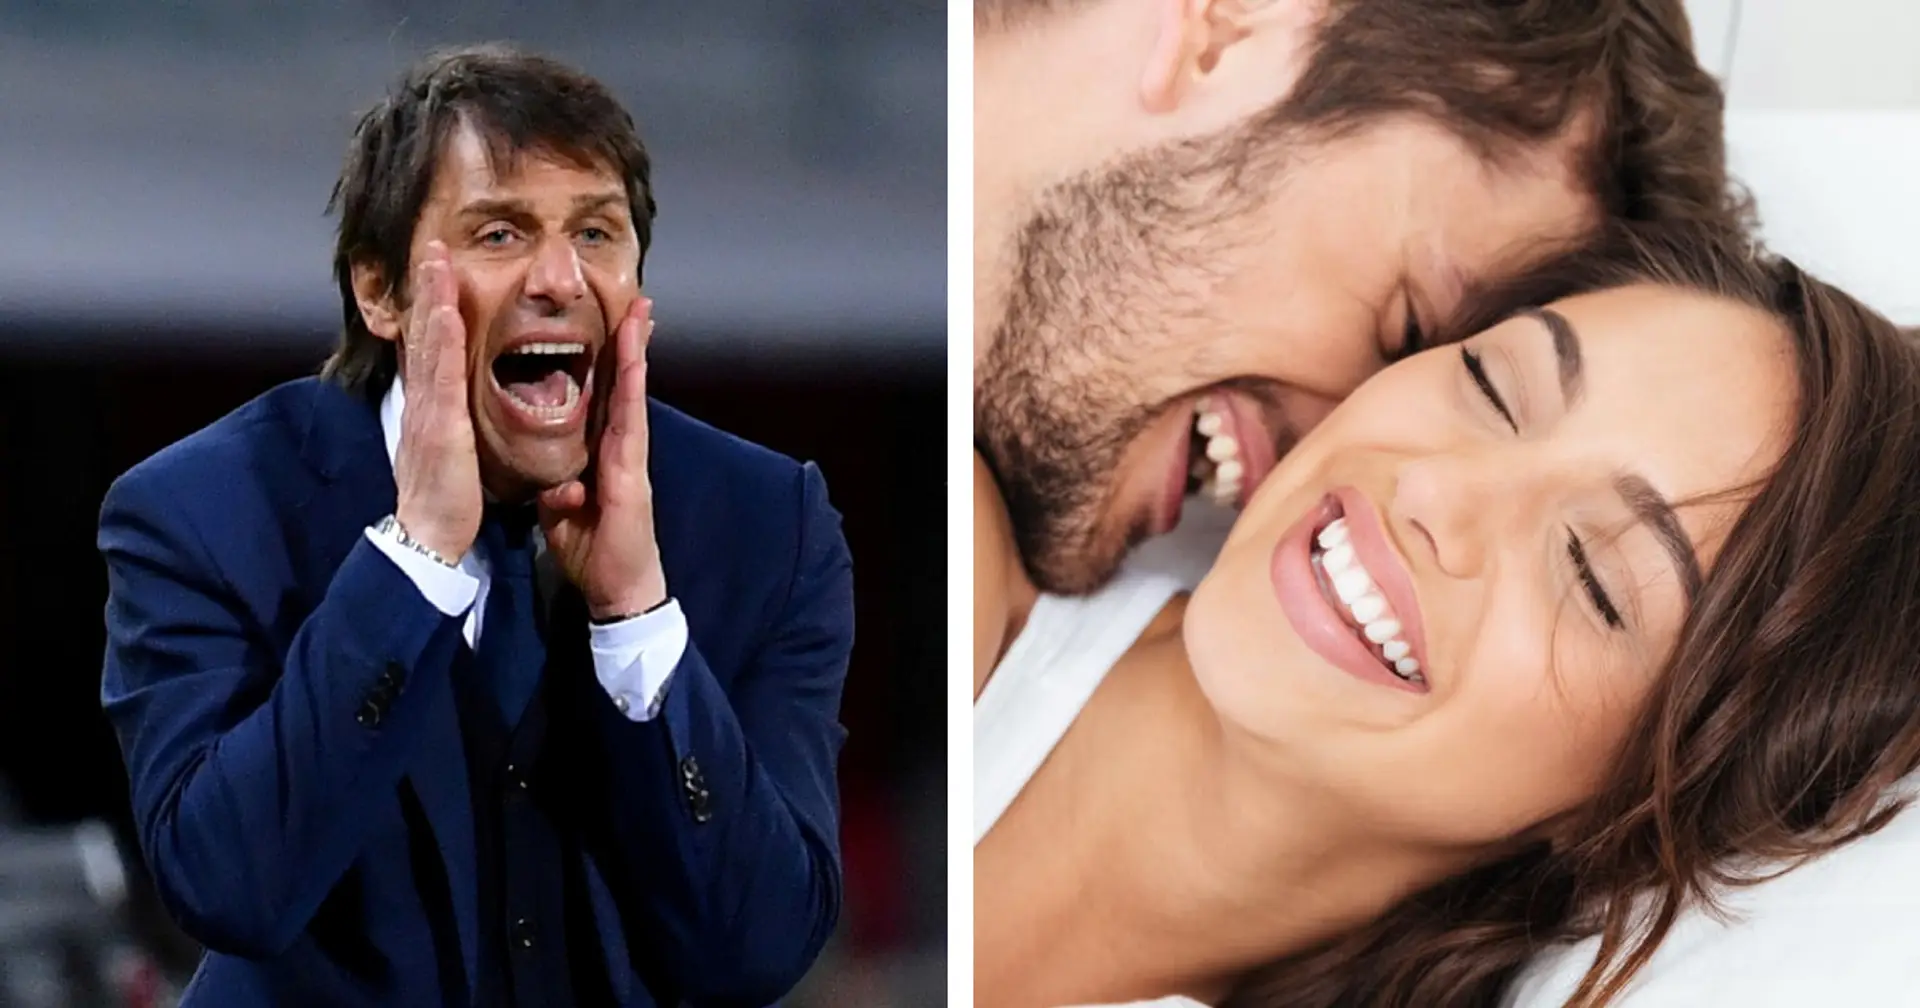 'Make as little effort as possible': new Spurs boss Antonio Conte has special sex tips for his players